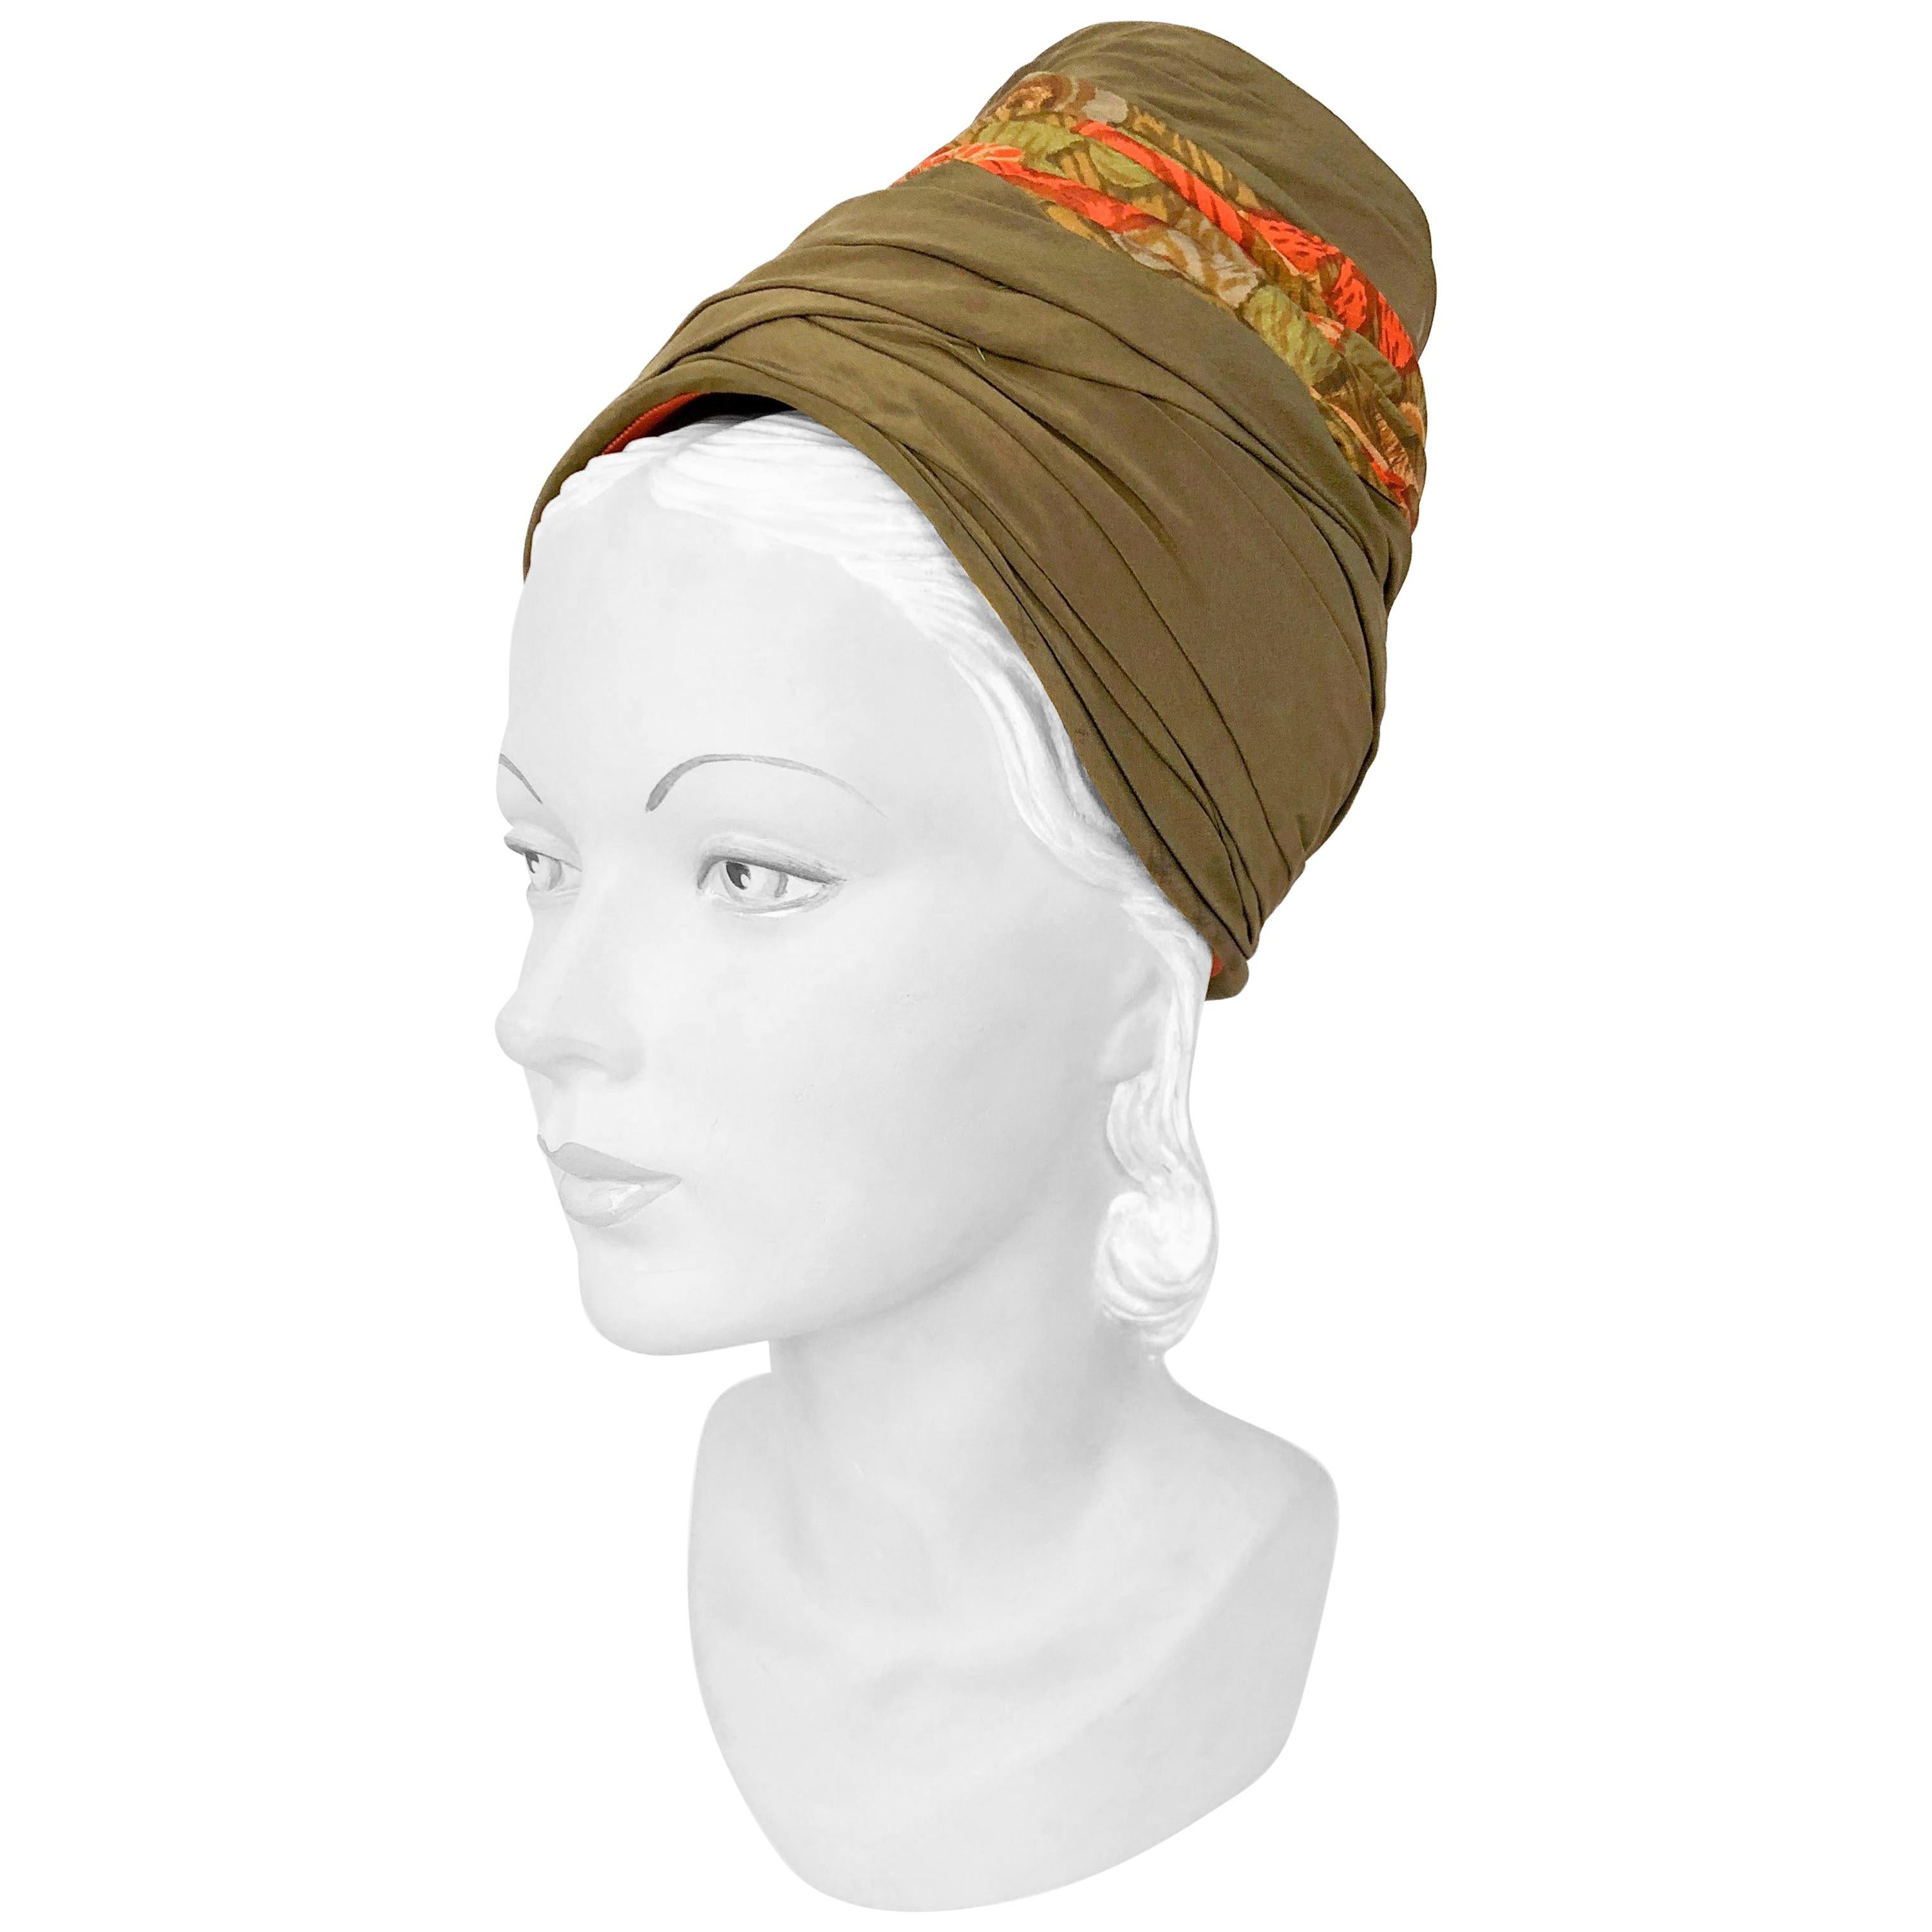 1950s High-Fashion Structured Turban in Olive and Tropical Print